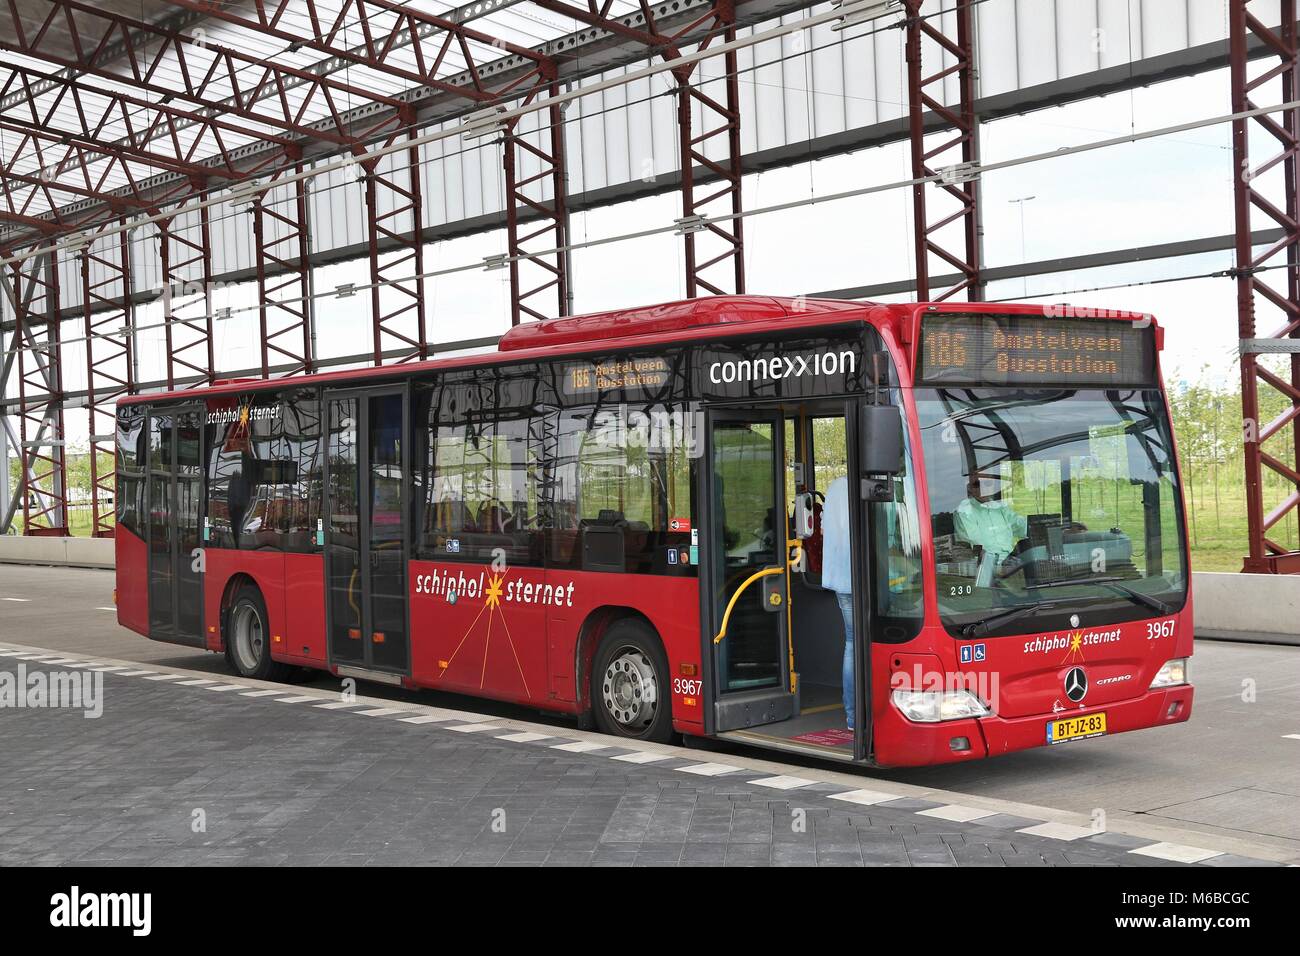 AMSTERDAM, - JULY 10, 2017: People ride Connexxion city bus in Amsterdam. Other public transportation bus companies in Amsterdam GVB a Stock Photo Alamy